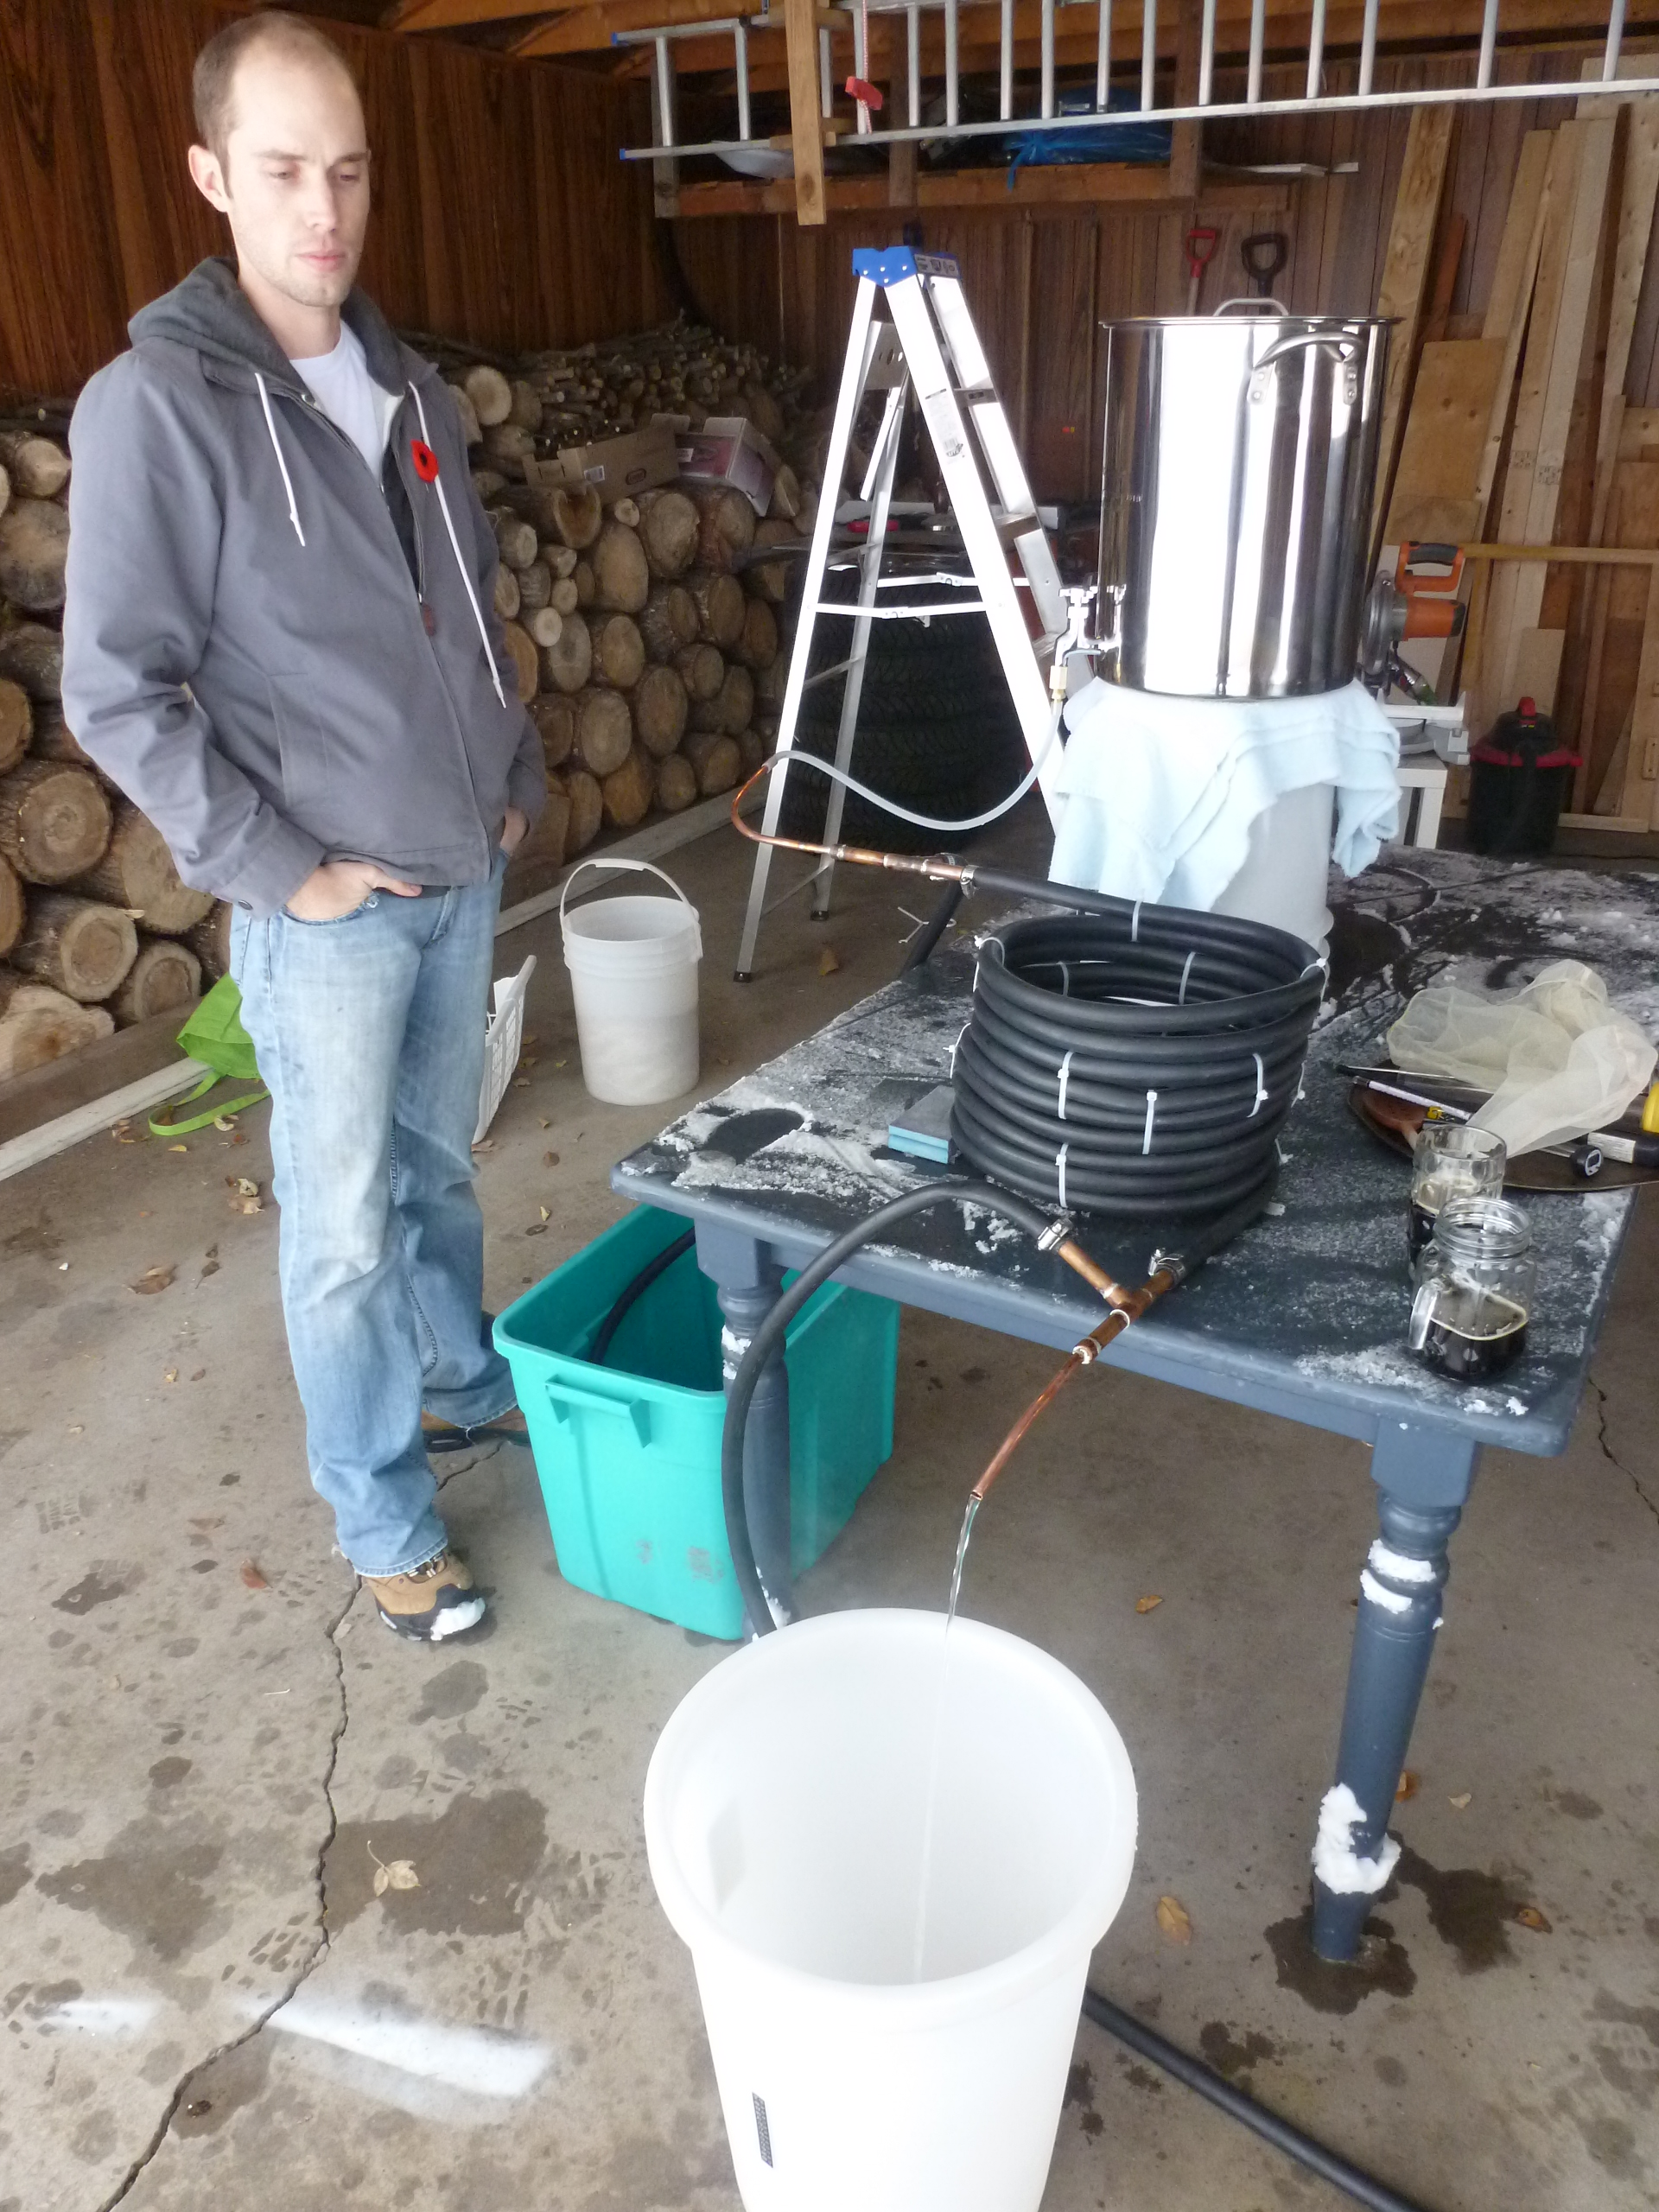 Neil supervising the sterilization of the wort chiller